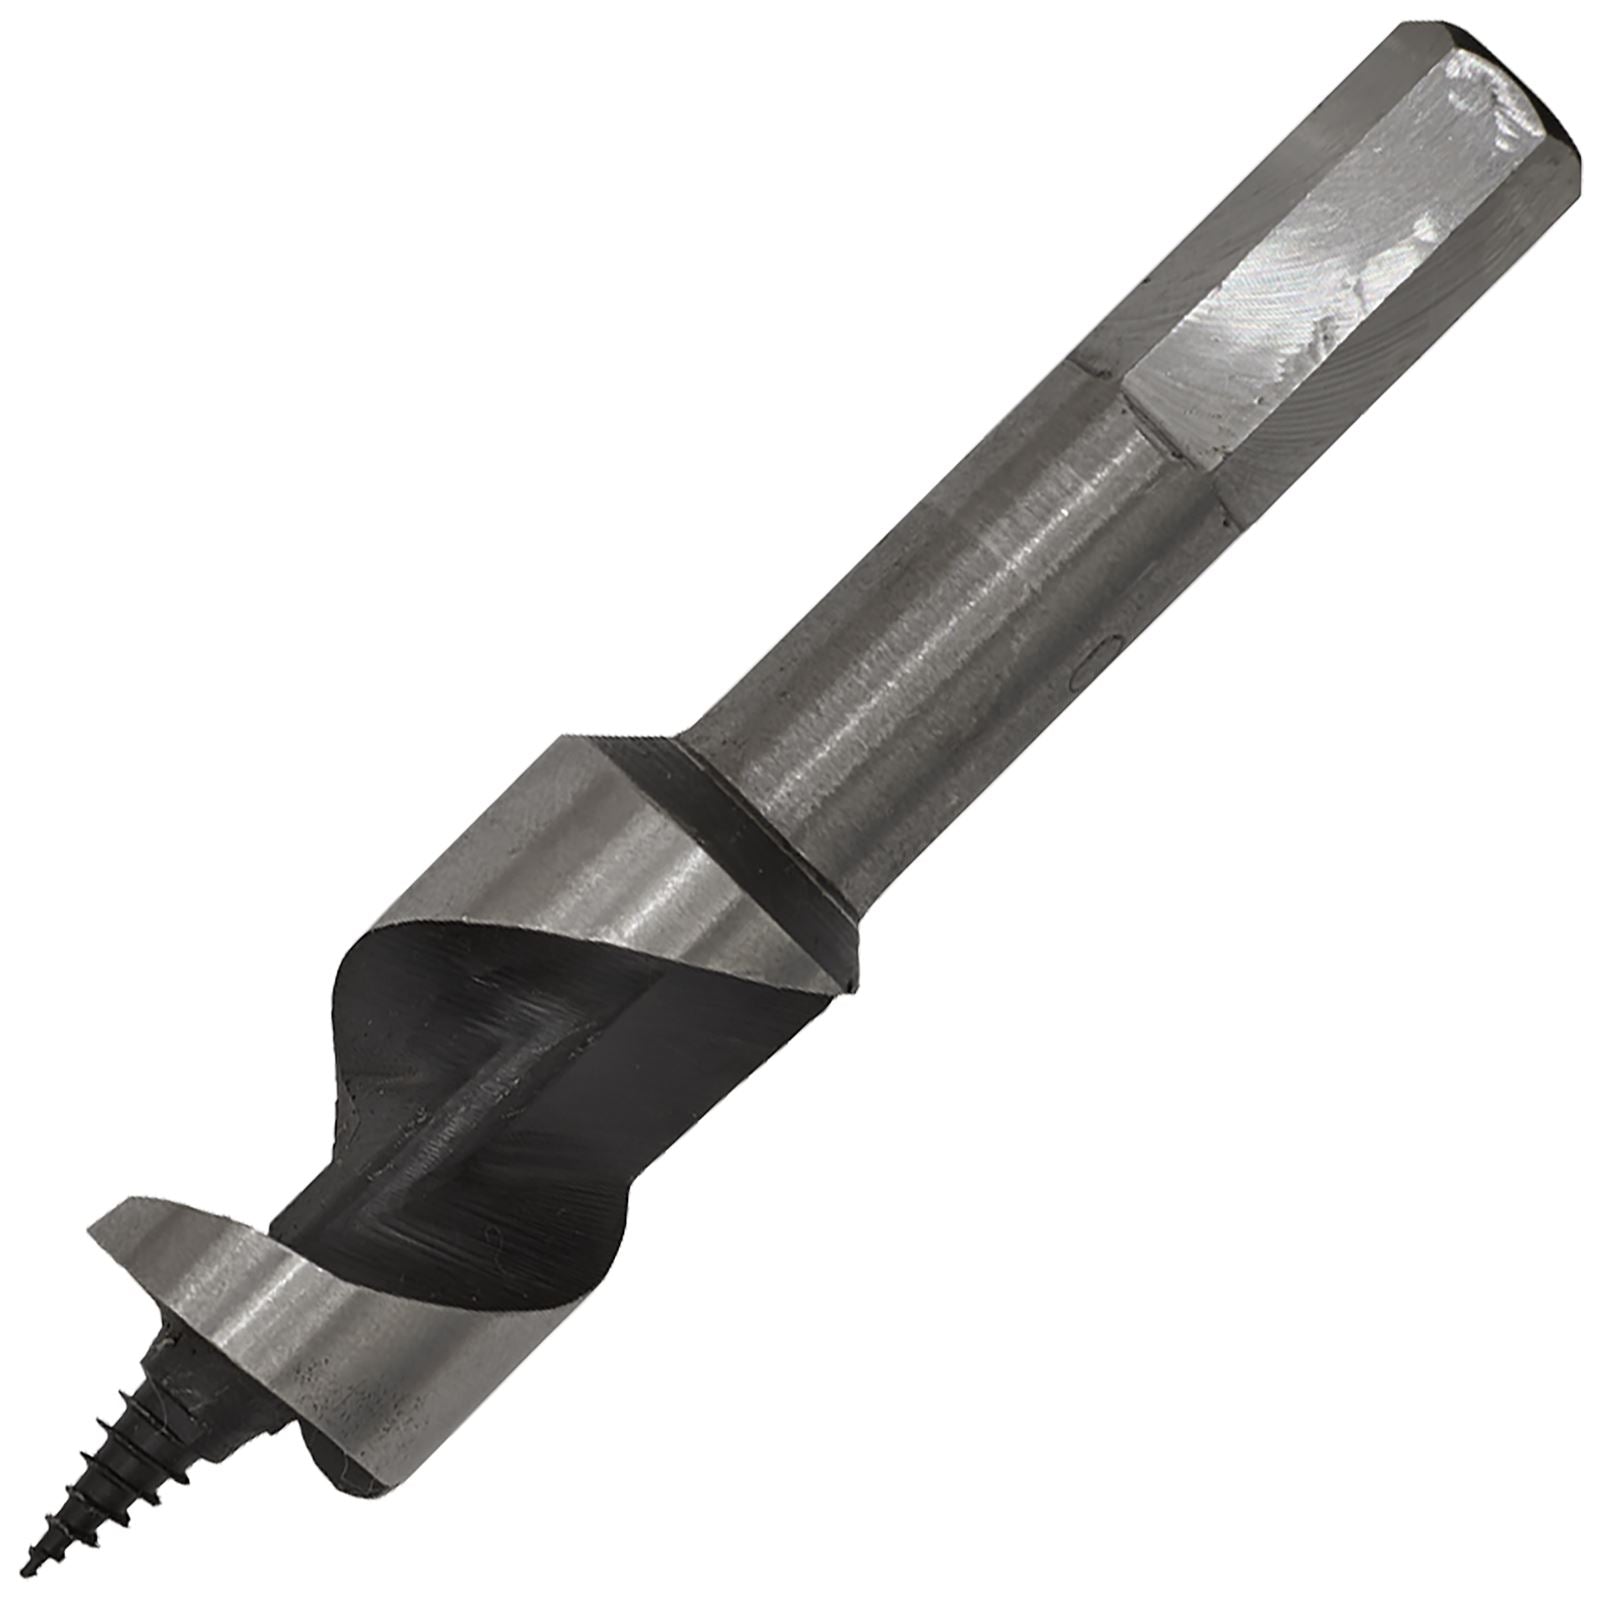 Worksafe by Sealey Auger Wood Drill Bit 20mm x 100mm